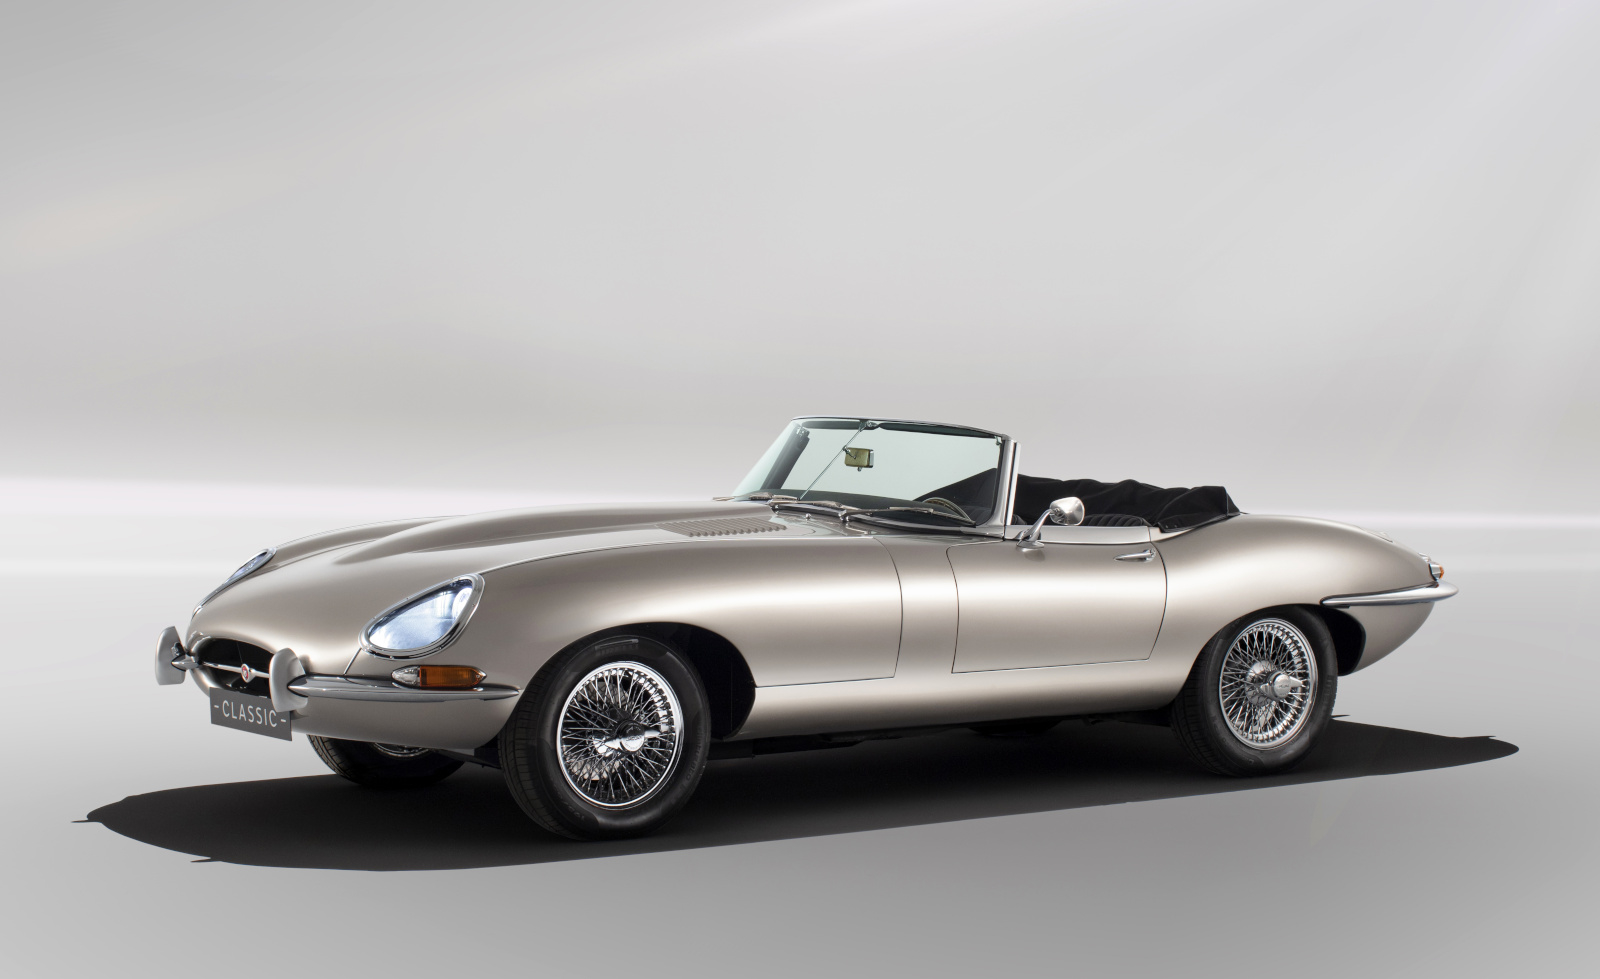 Jaguar's all-electric E-type is coming in 2020